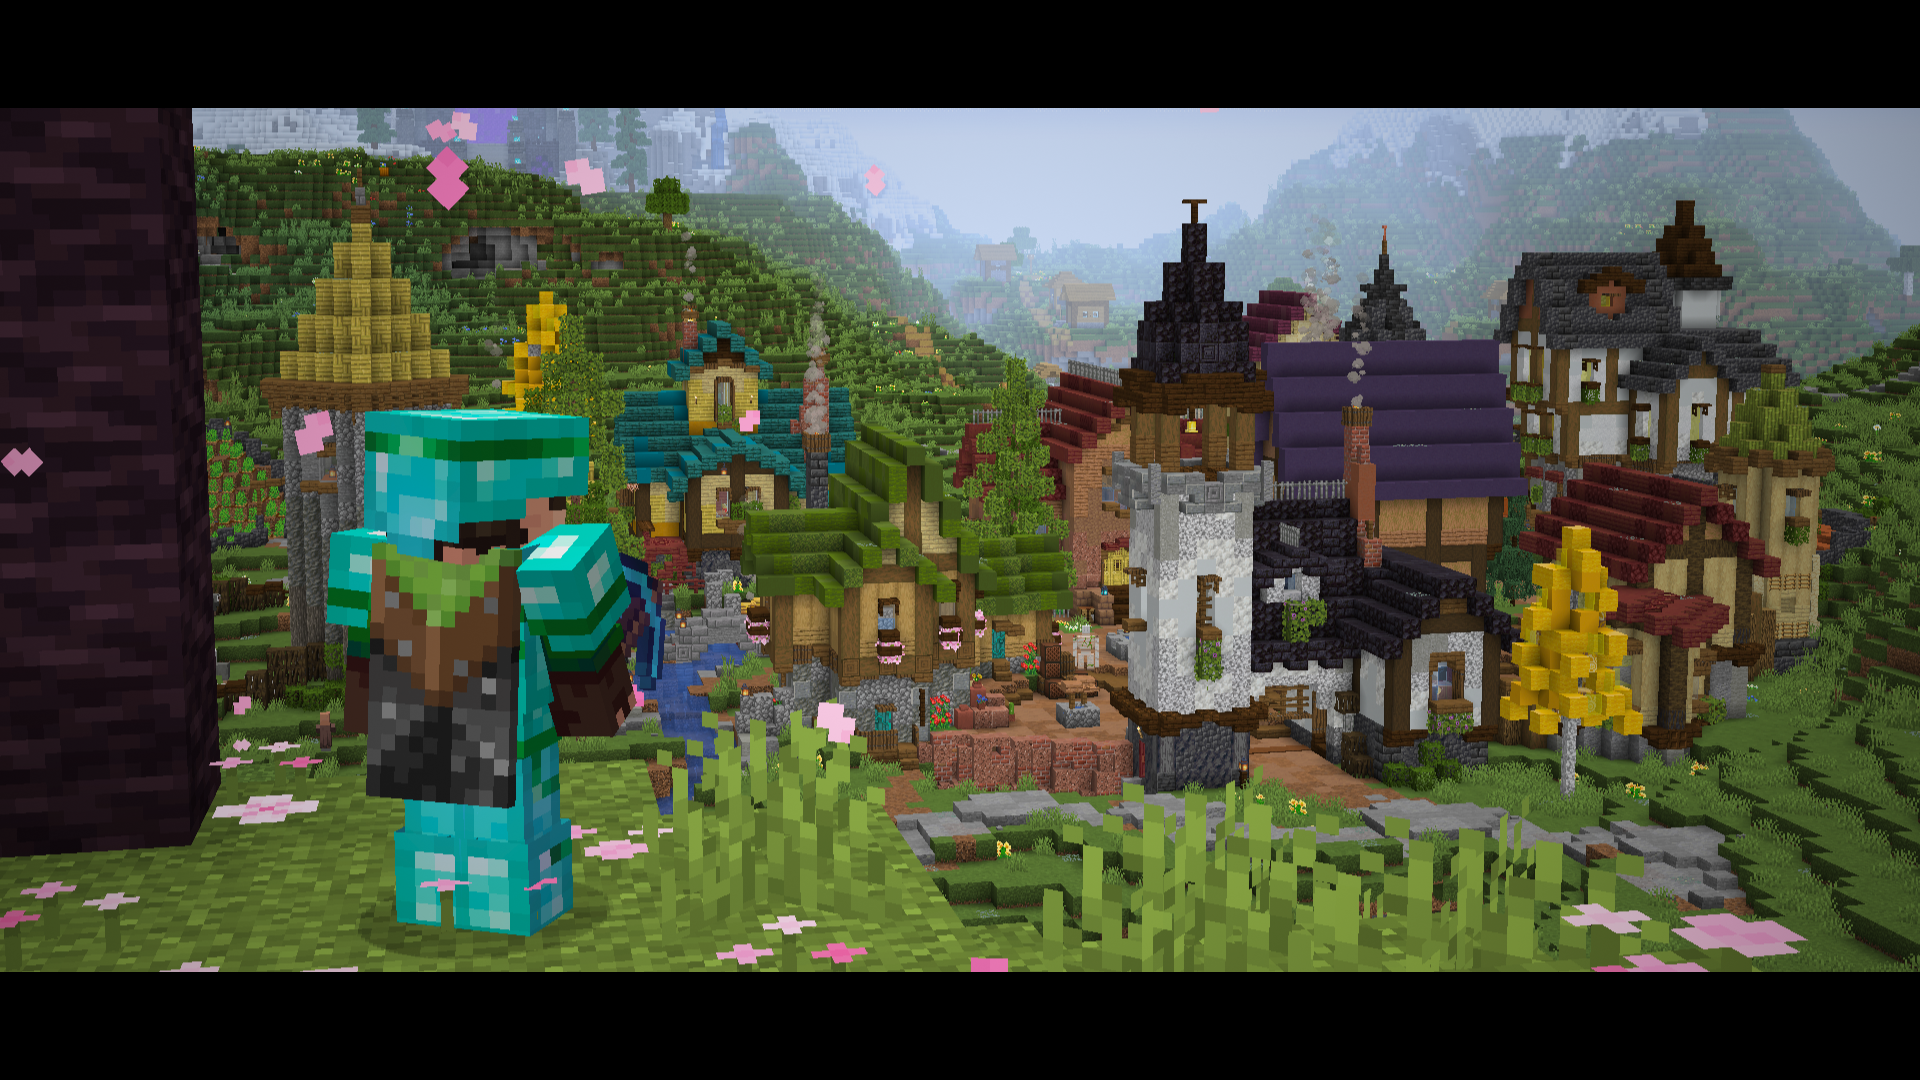 The minecraft overwold with a village